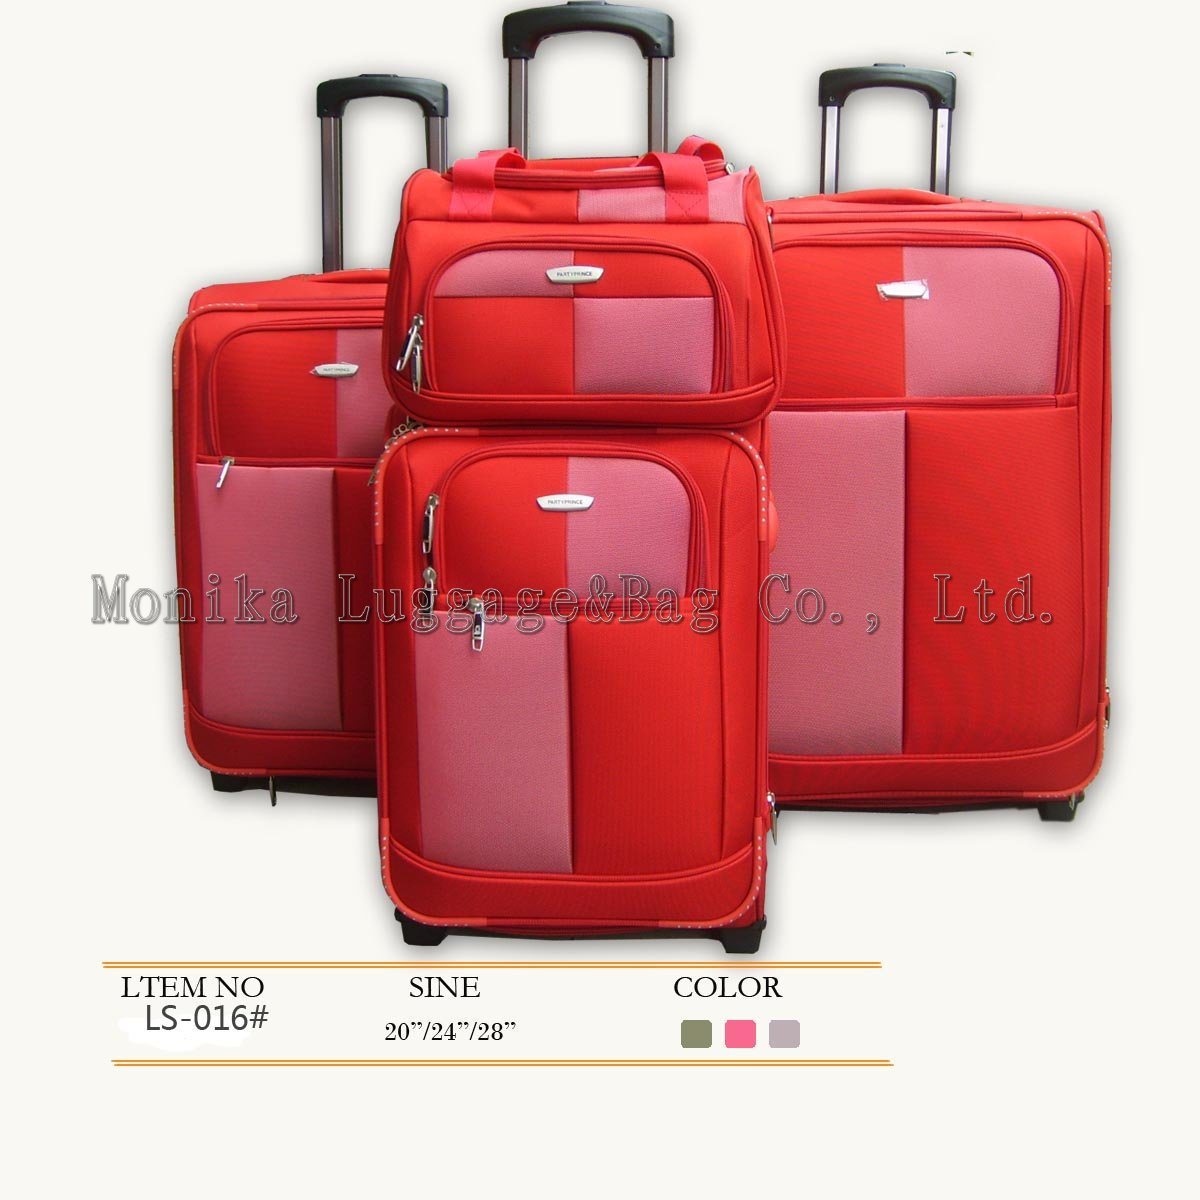 Sport Luggage for Traveling (LS-016#)